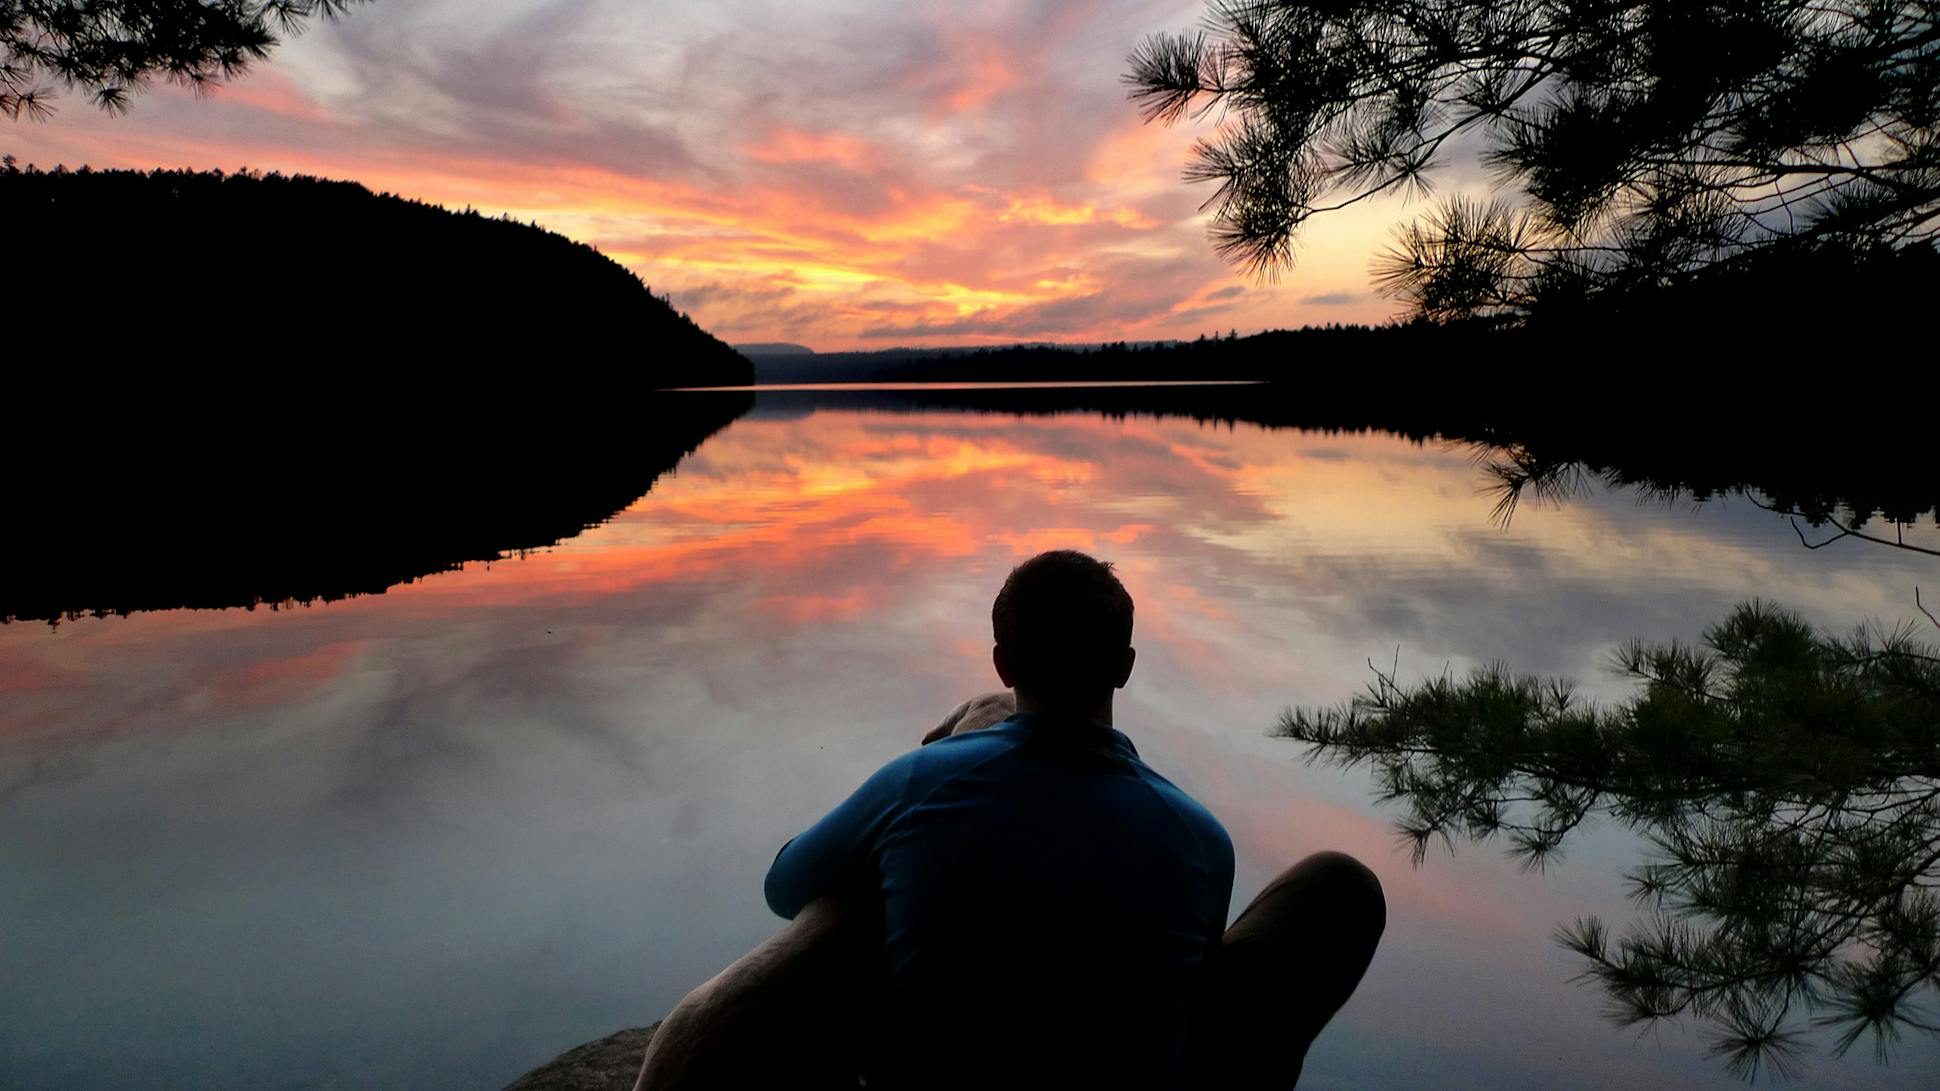 Aidan Jones and his dog Crosby took in a sublime sunset over John Lake in the Boundary Waters Canoe Area Wilderness.